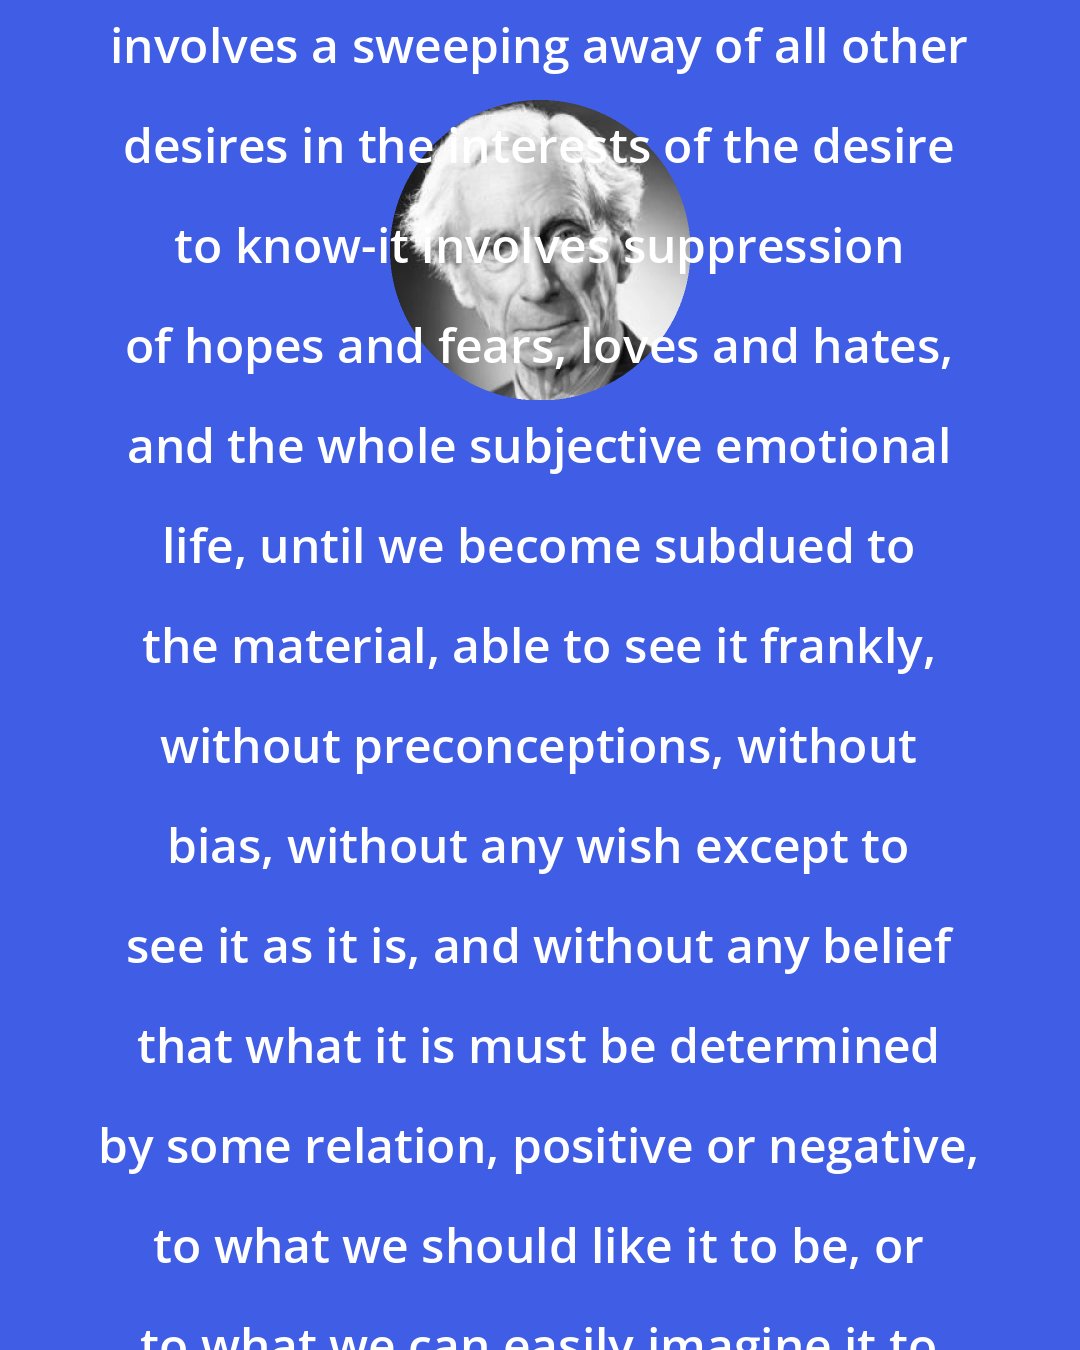 Bertrand Russell: The scientific attitude of mind involves a sweeping away of all other desires in the interests of the desire to know-it involves suppression of hopes and fears, loves and hates, and the whole subjective emotional life, until we become subdued to the material, able to see it frankly, without preconceptions, without bias, without any wish except to see it as it is, and without any belief that what it is must be determined by some relation, positive or negative, to what we should like it to be, or to what we can easily imagine it to be.